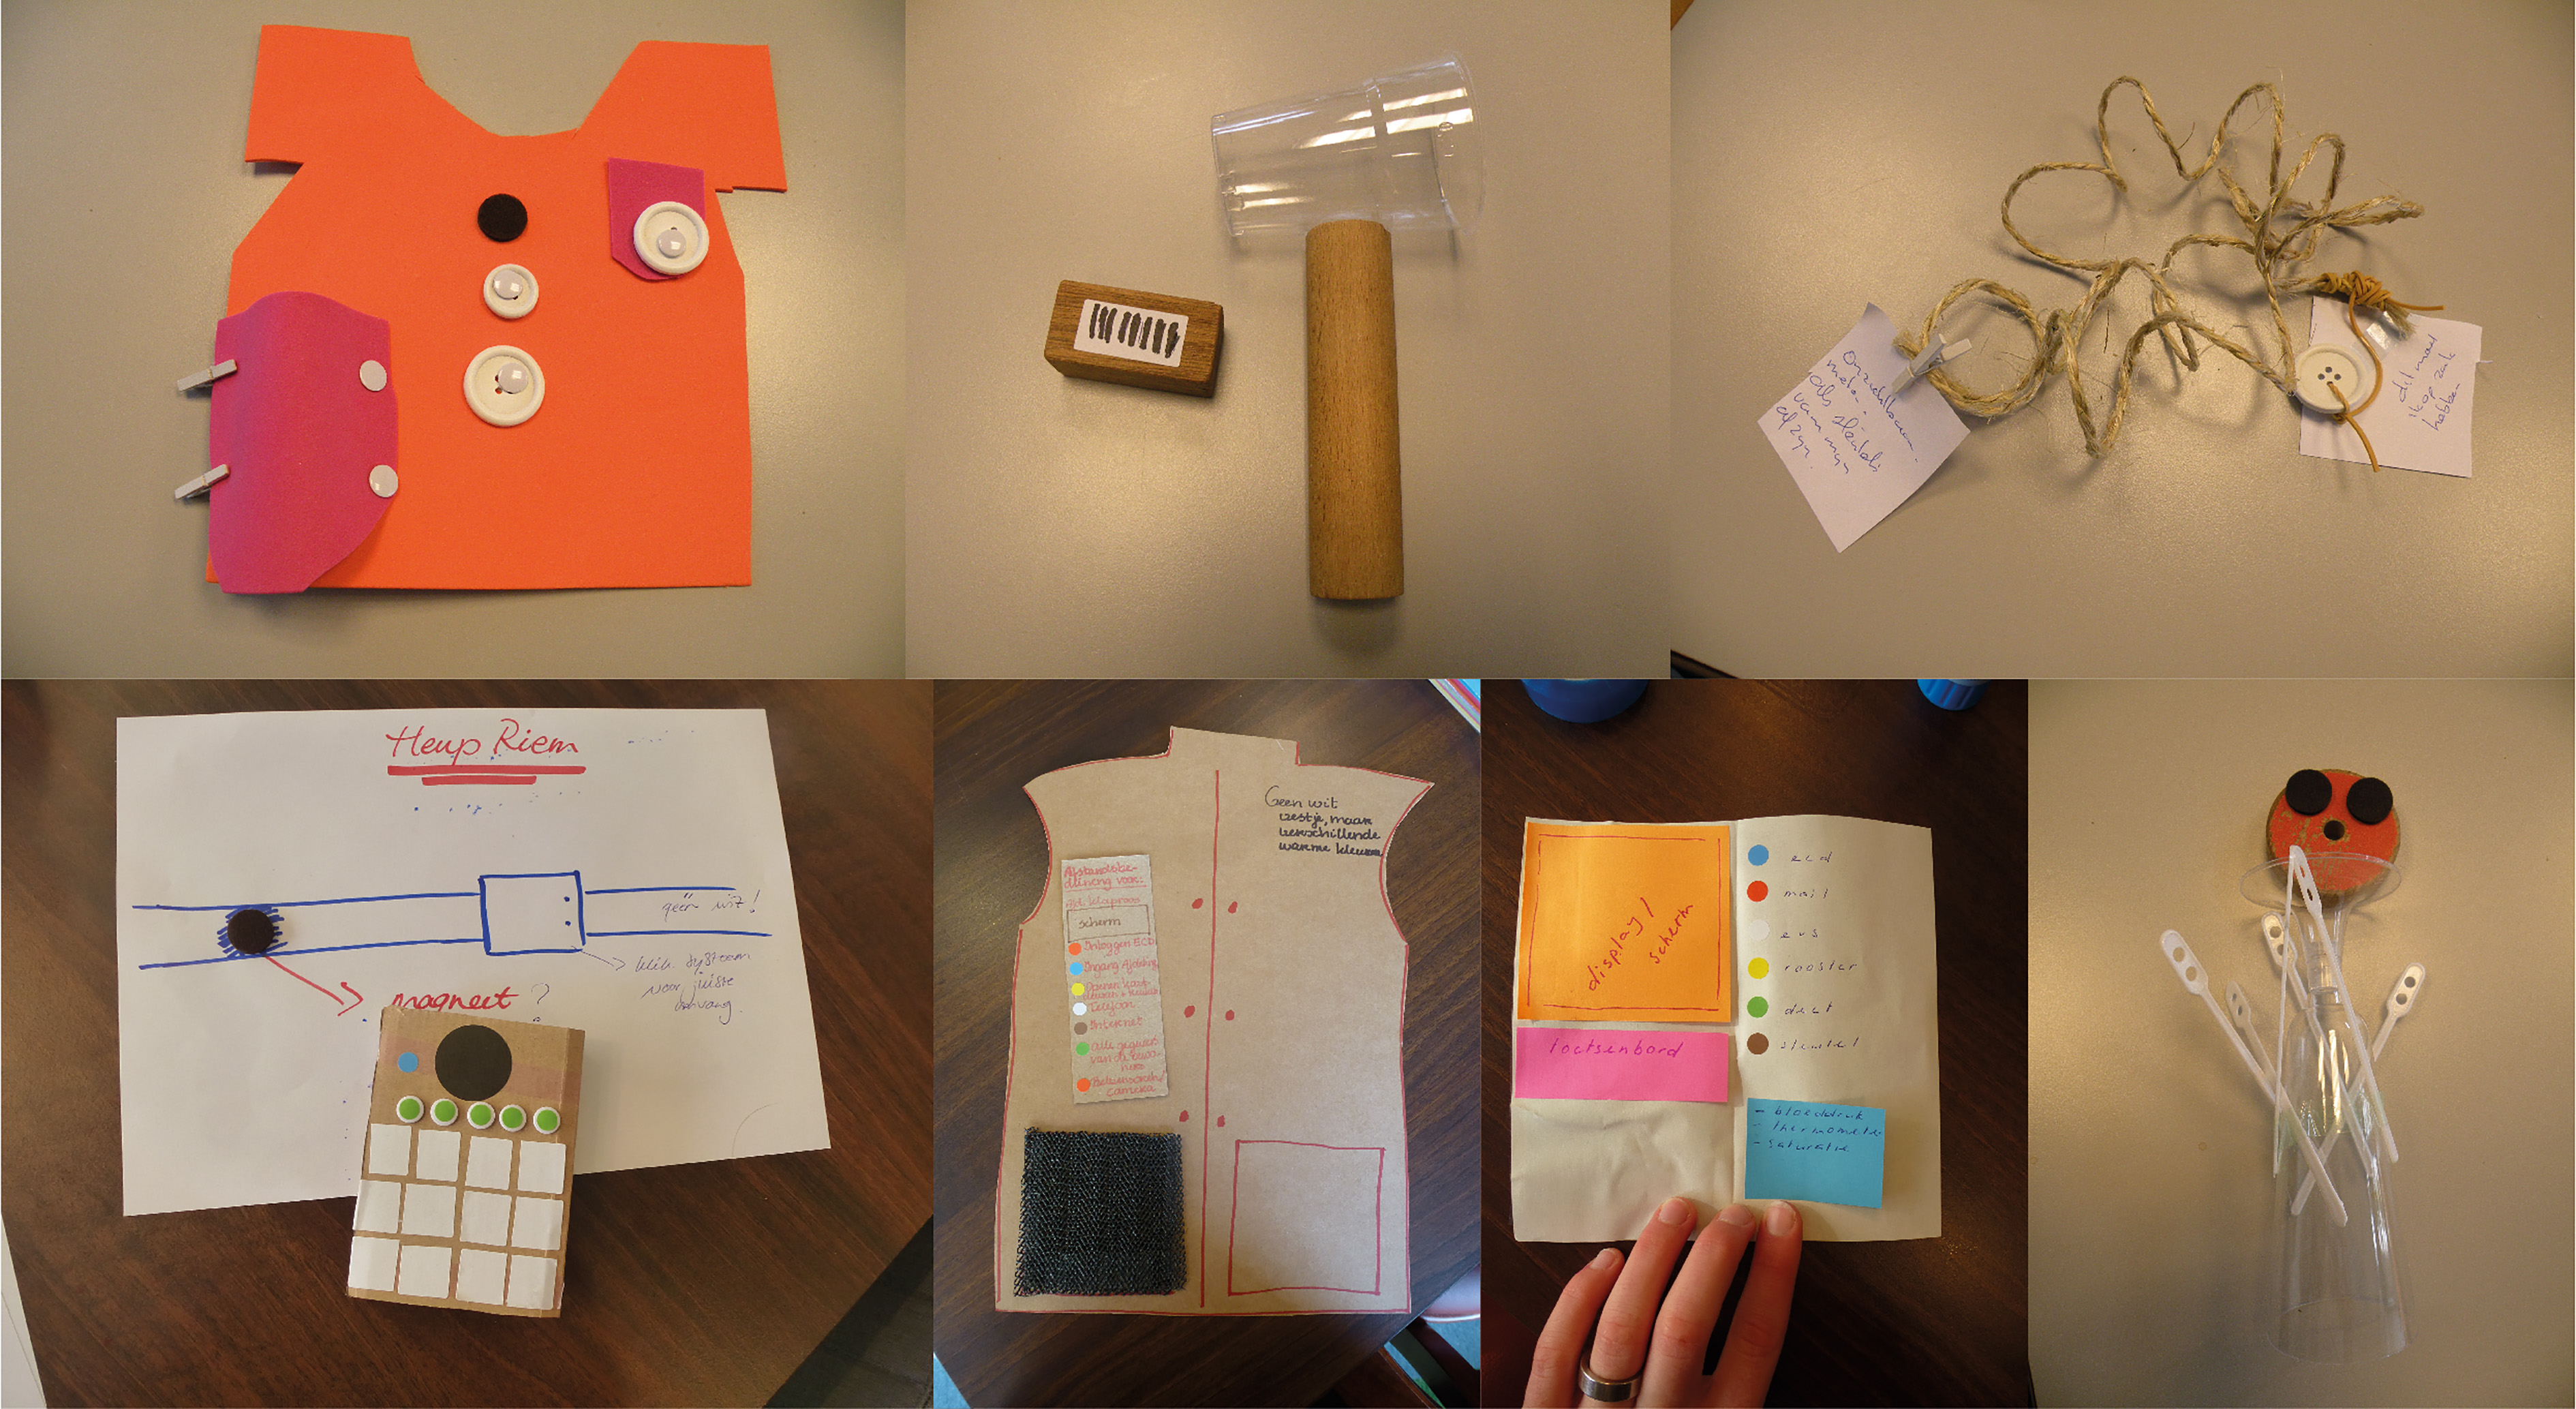 Some of the prototypes that were designed by the participants